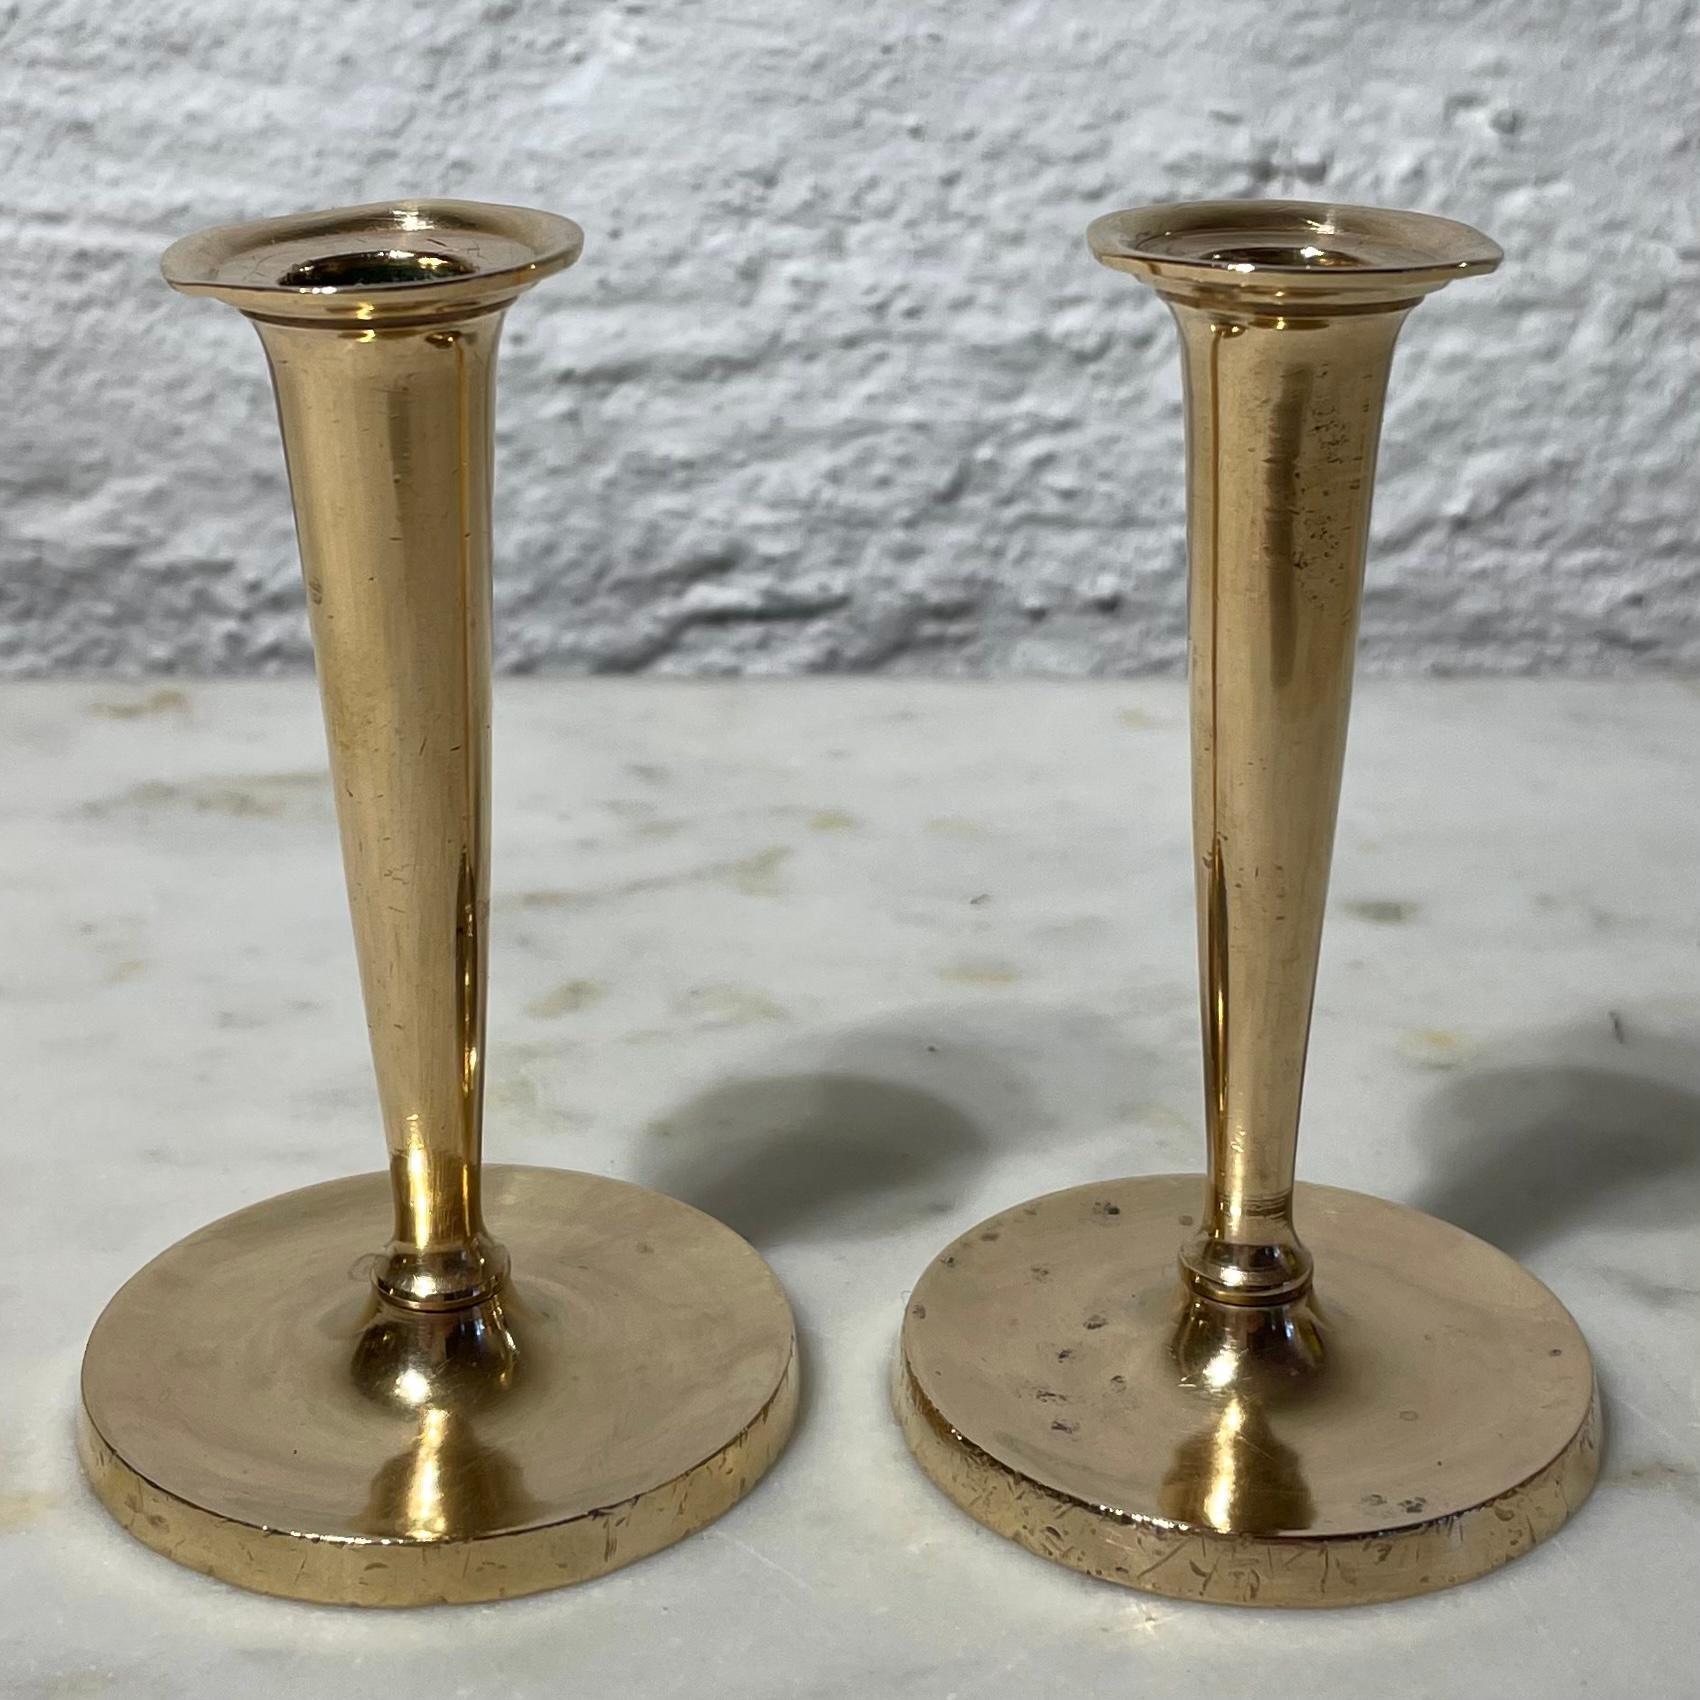 A pair of cute trumpet-shaped miniature brass candlesticks in Karl Johan, during the 1830s.

Wear consistent with age and use.